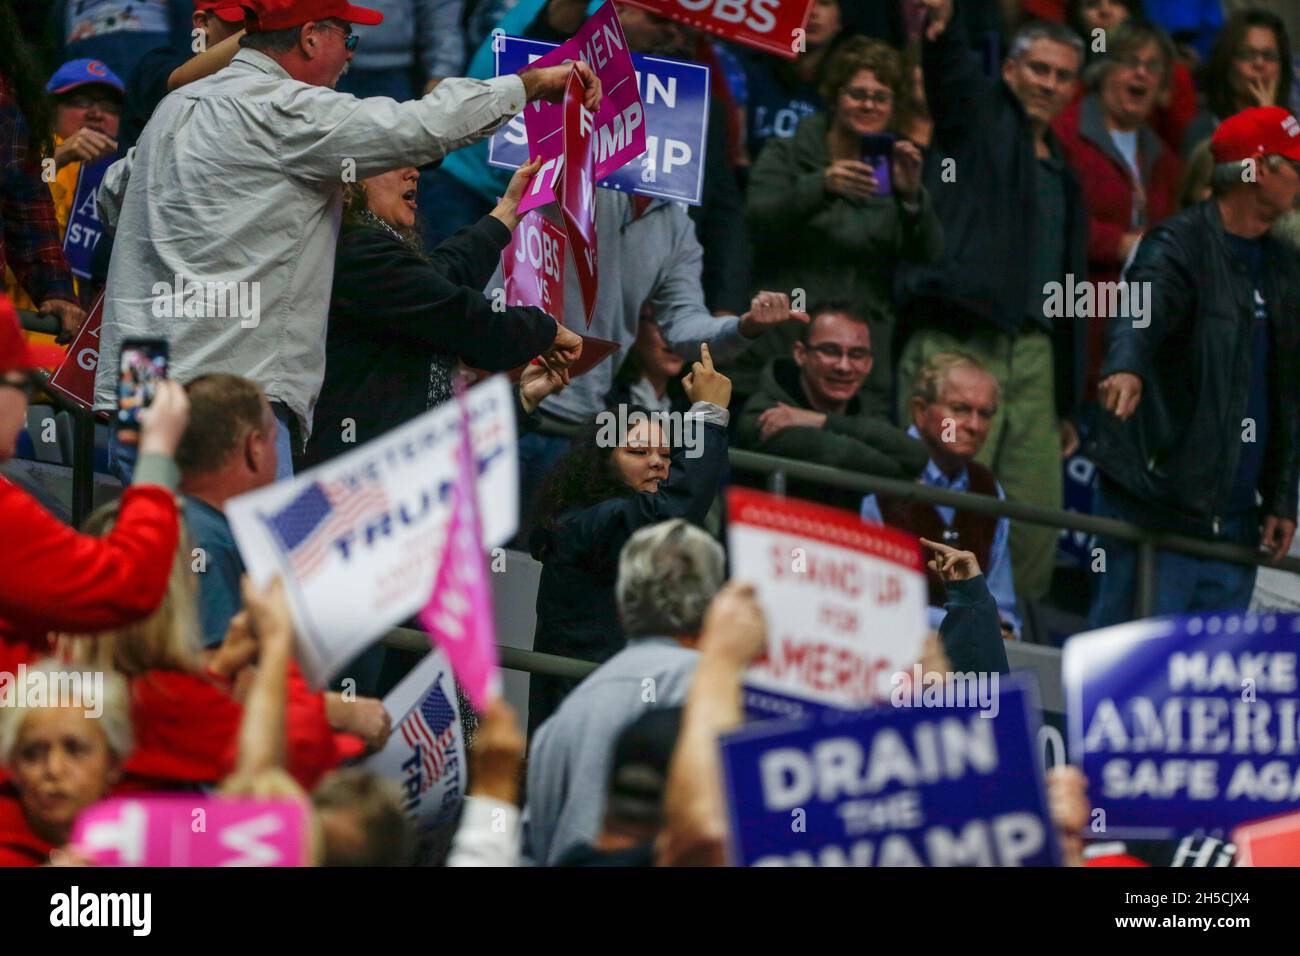 11052018 - Fort Wayne, Indiana, USA: A protester is escorted away as United States President Donald J. Trump campaigns for Indiana congressional candidates, including Mike Braun, who is running for senate, during a Make America Great Again! rally at the Allen County War Memorial Coliseum in Fort Wayne, Indiana. Stock Photo